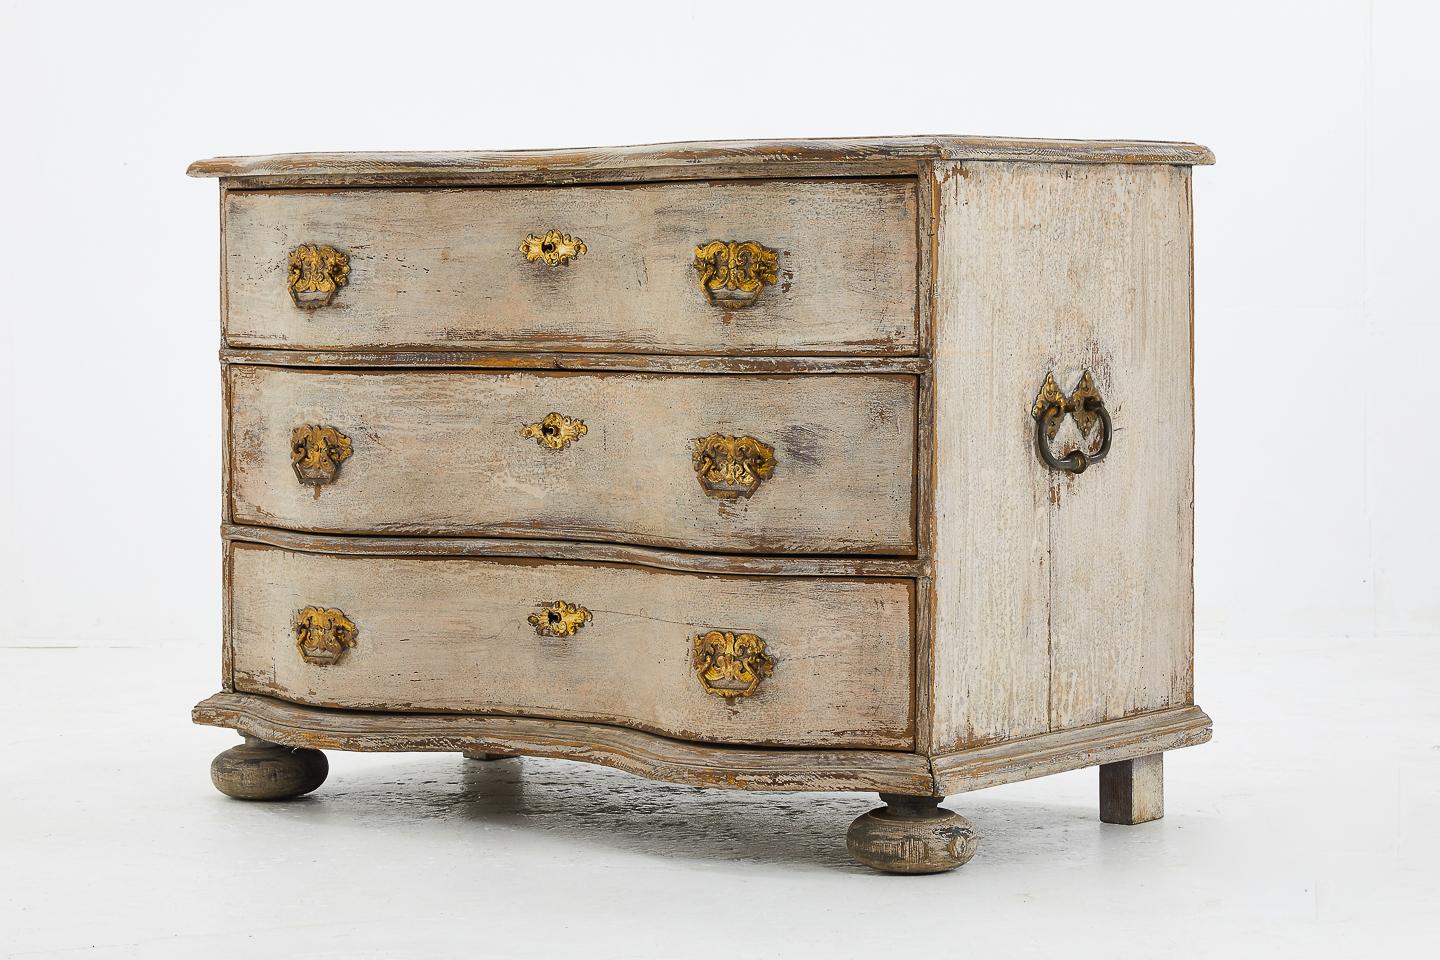 18th century painted serpentine commode with later paint. Original handles.
 